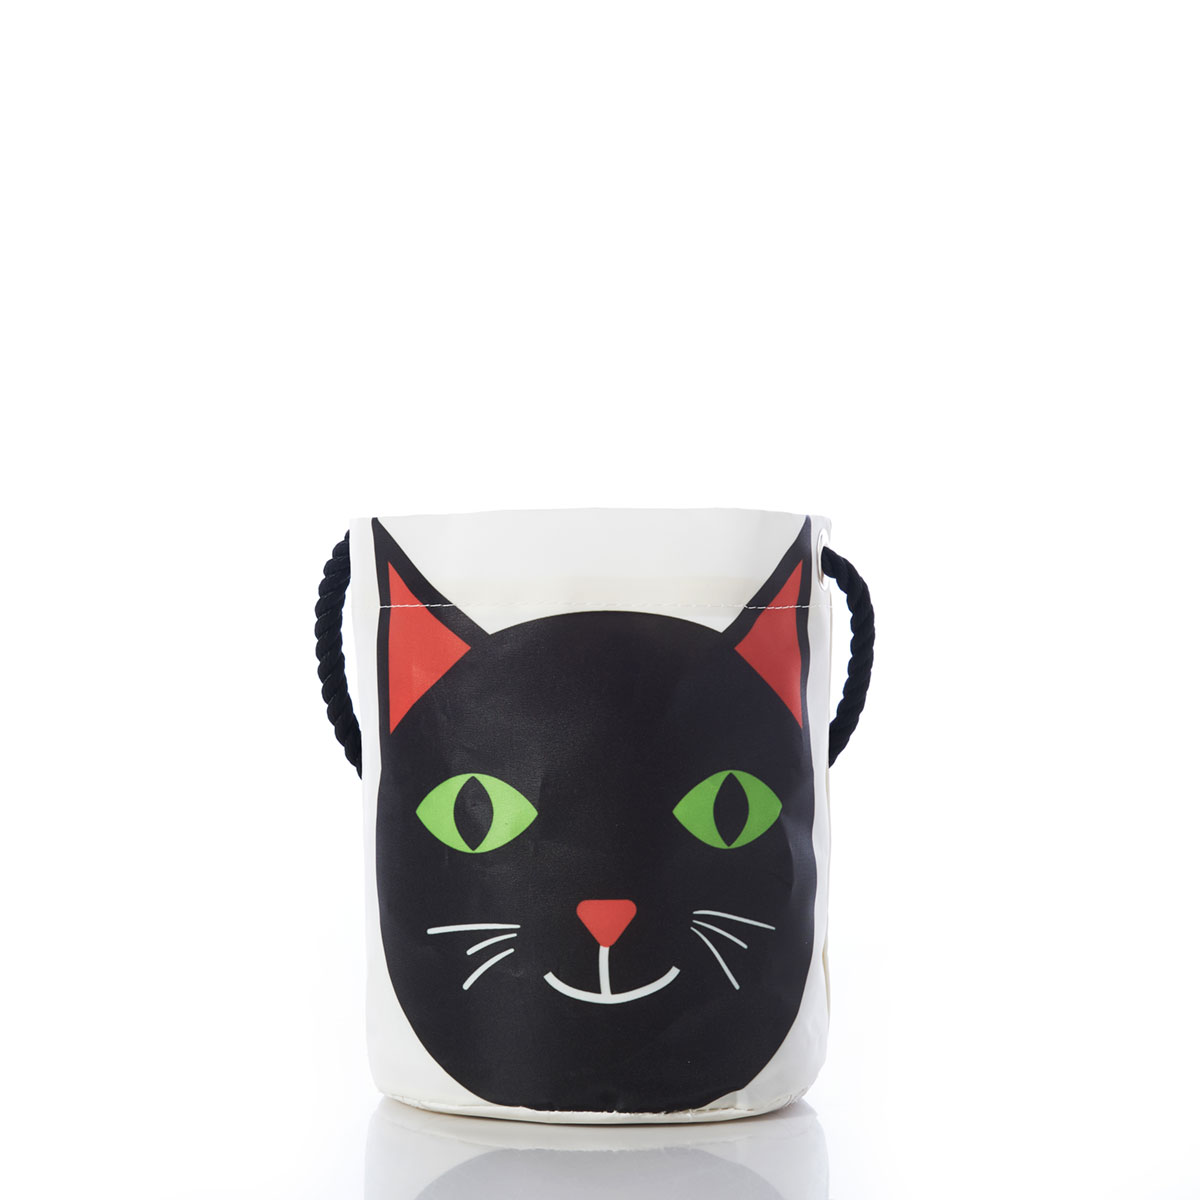 a smiling black cat face is printed on a white recycled sail cloth bucket bag with a hemp rope handle